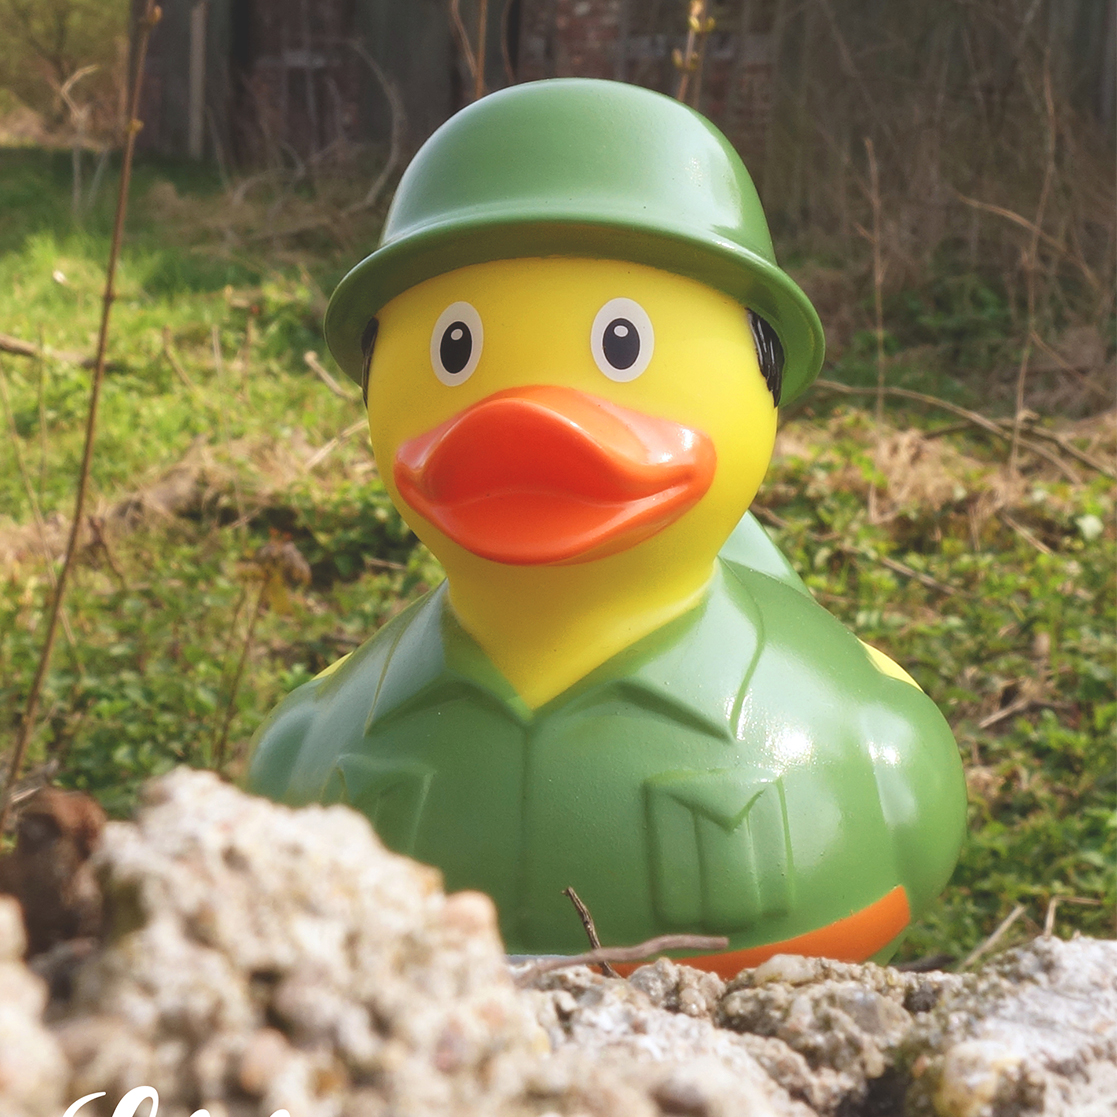 Soldier Rubber Duck By Lilalu